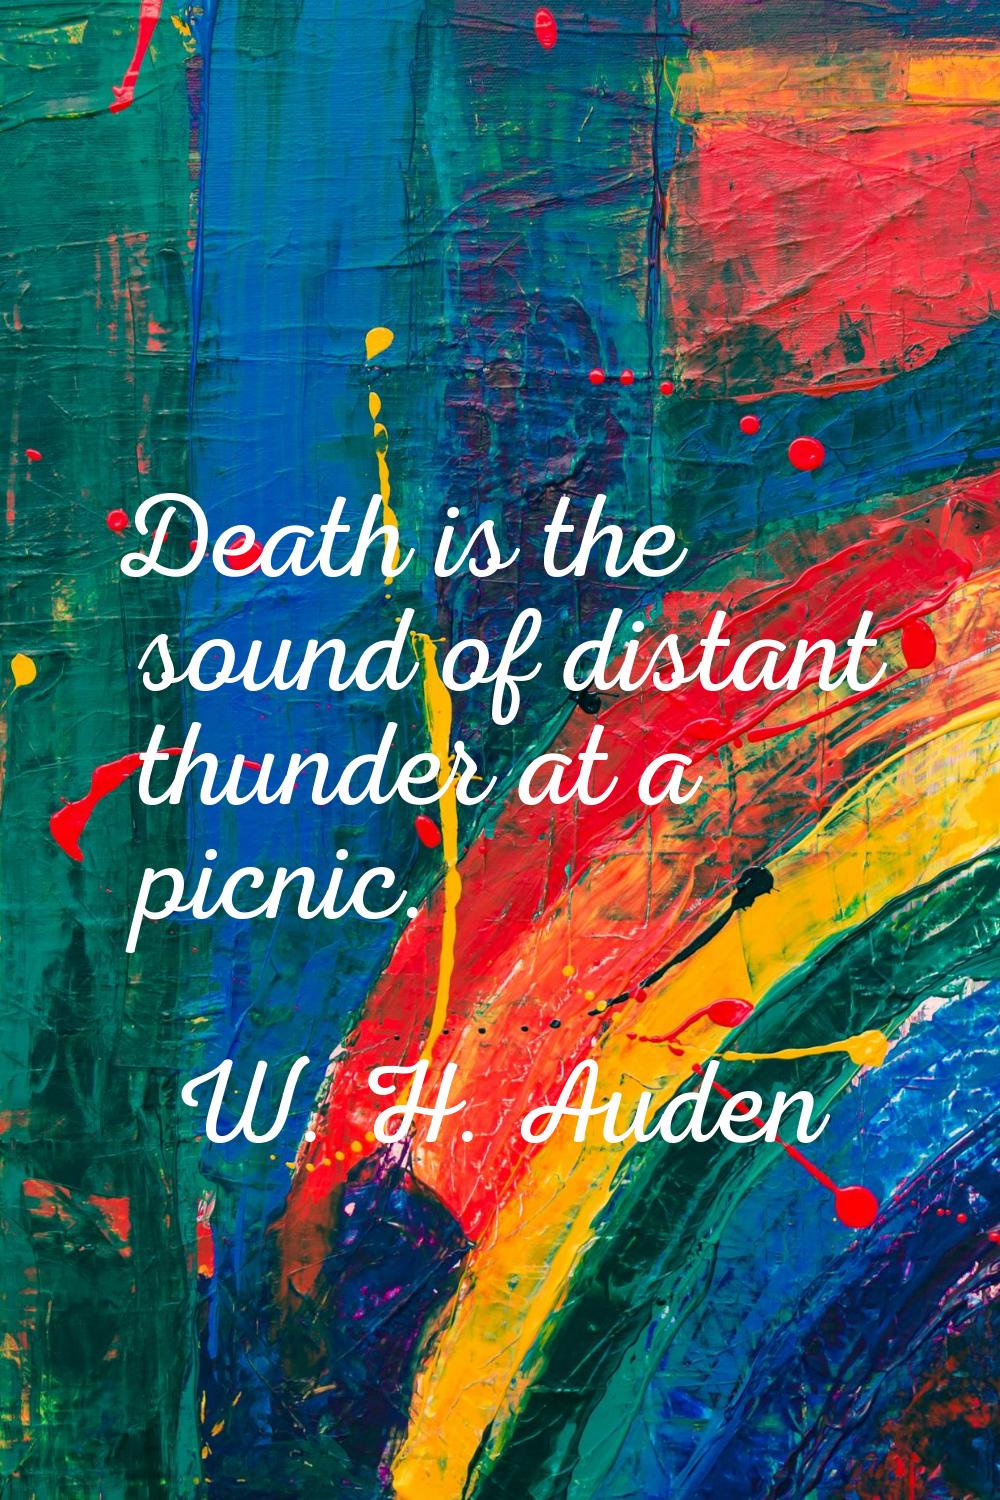 Death is the sound of distant thunder at a picnic.